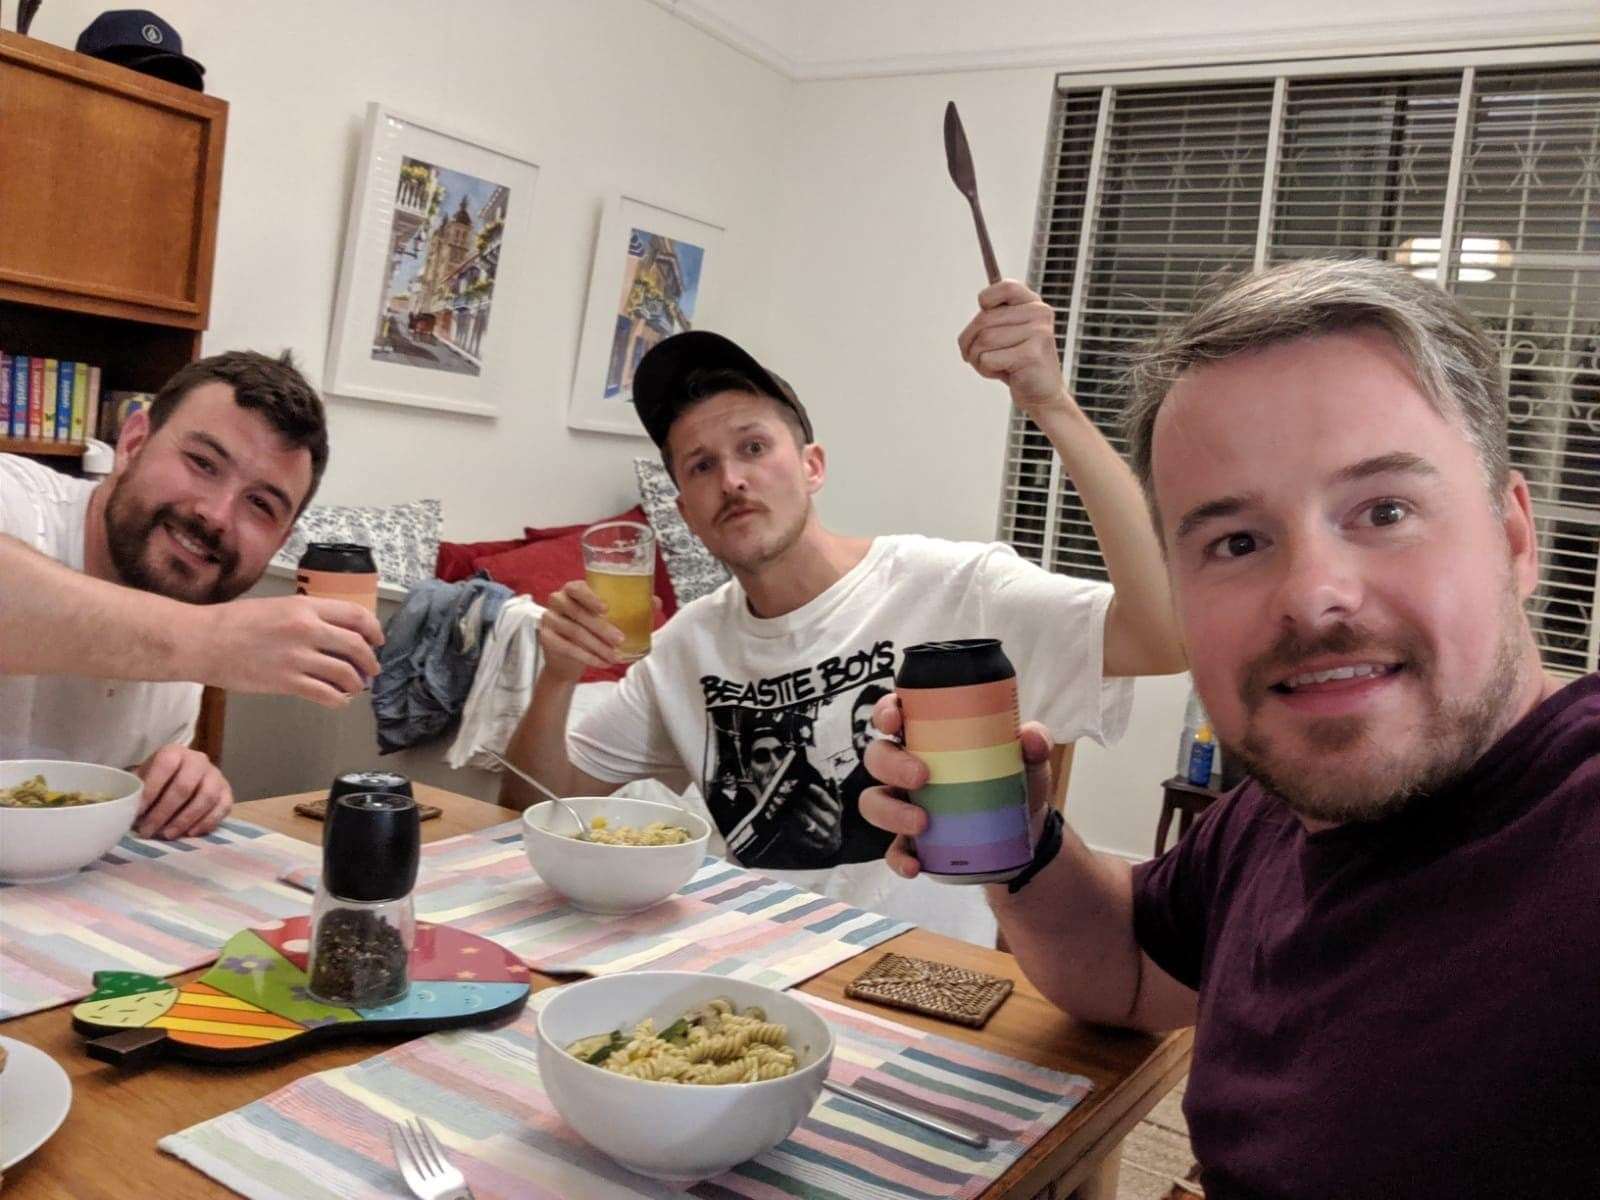 Liam Minnock (far left) and his friends have had to extend their stay at an Air BnB in Sydney